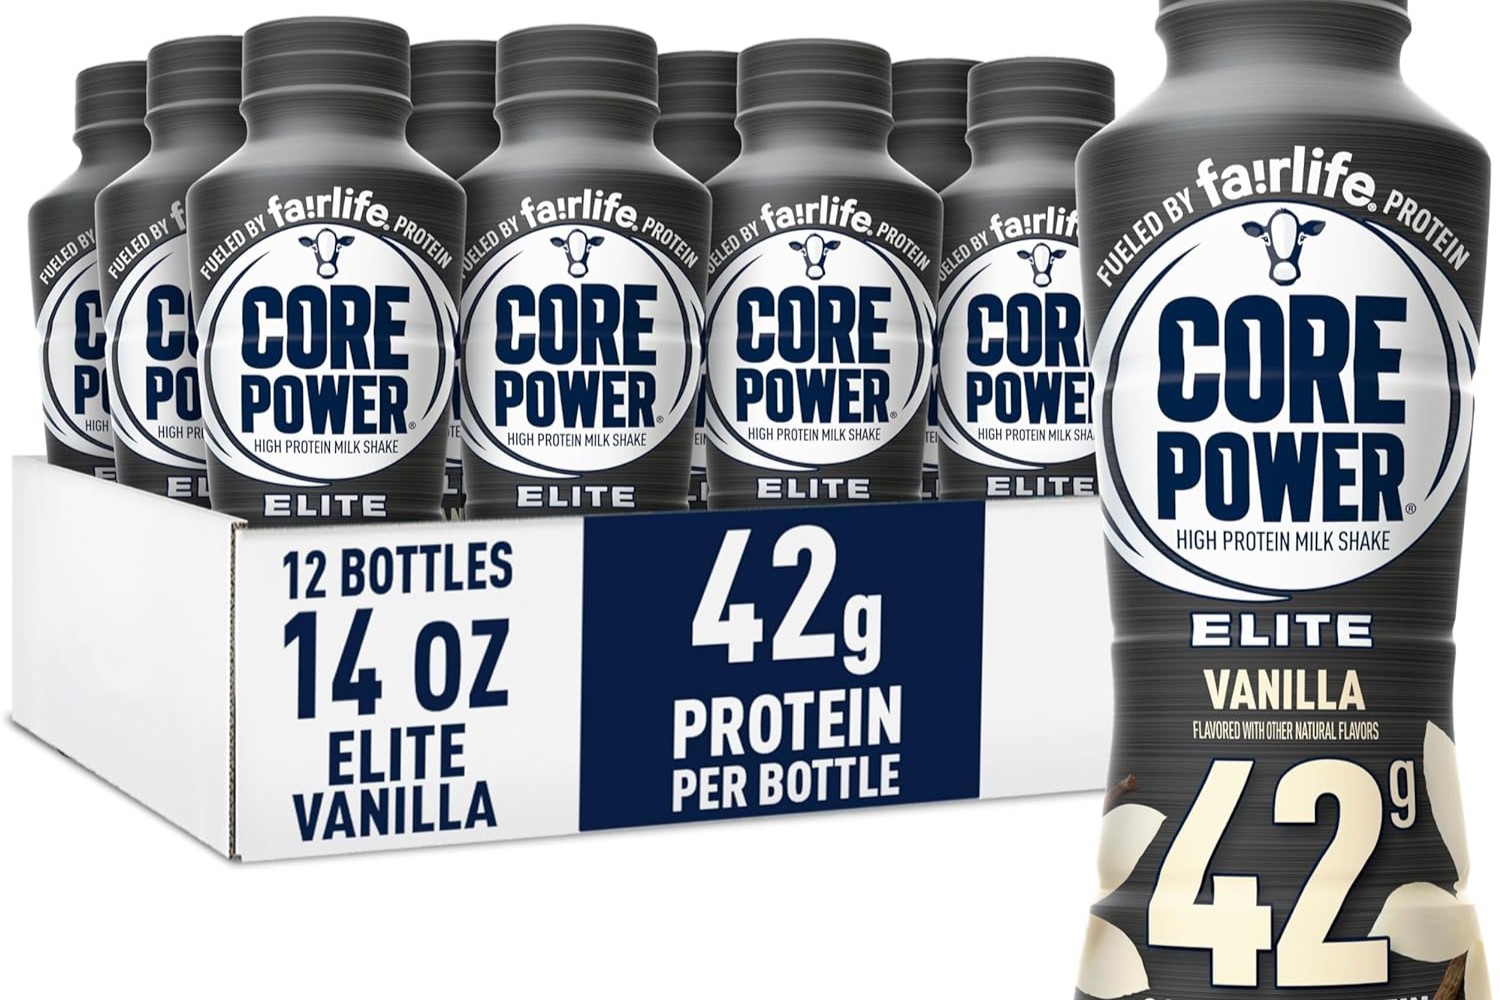 11-fairlife-core-power-nutrition-facts